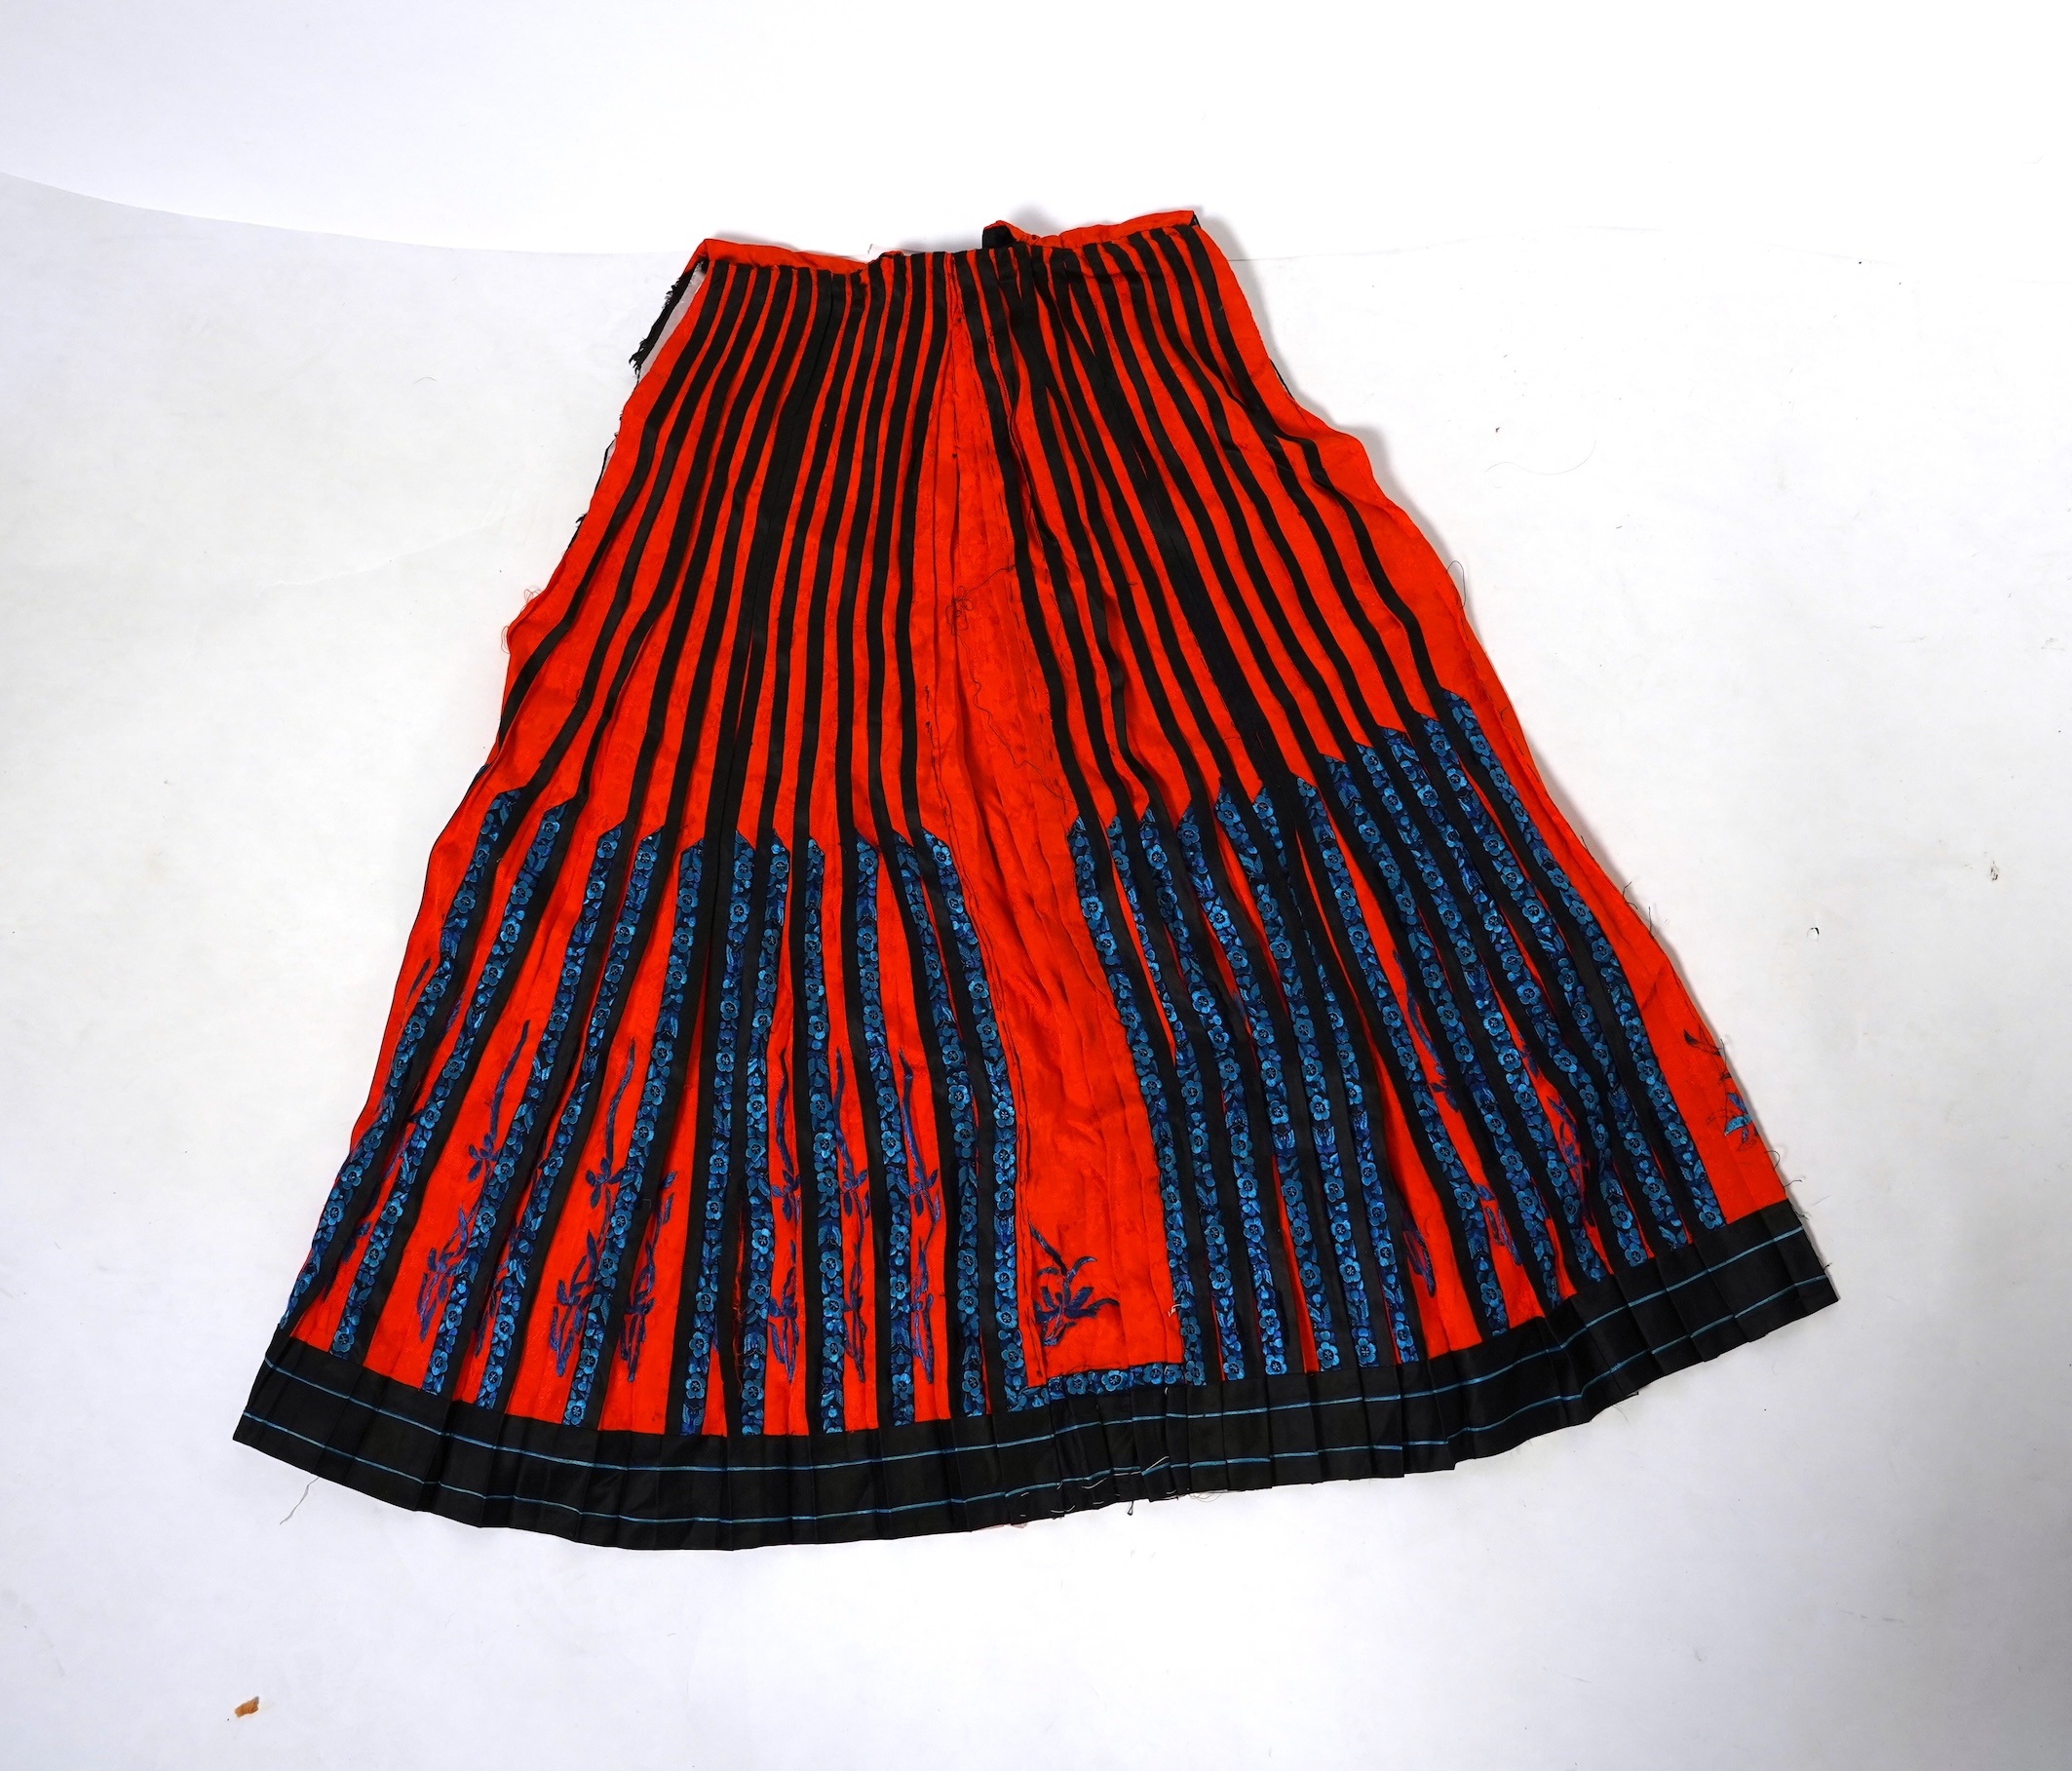 A late 19th century Chinese embroidered skirt, now made into a tunic